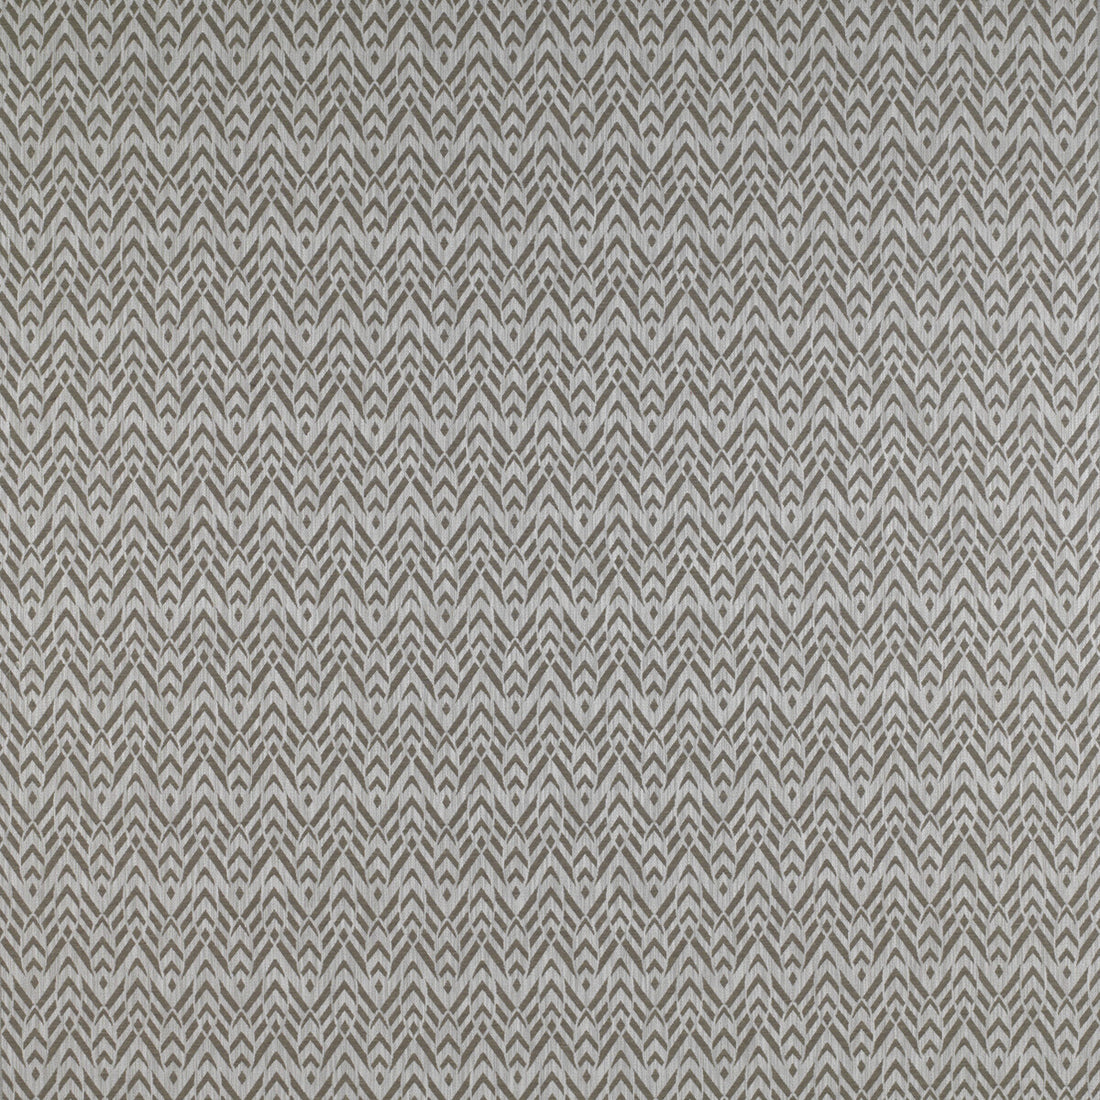 Cervantes fabric in lino color - pattern GDT5200.006.0 - by Gaston y Daniela in the Madrid collection